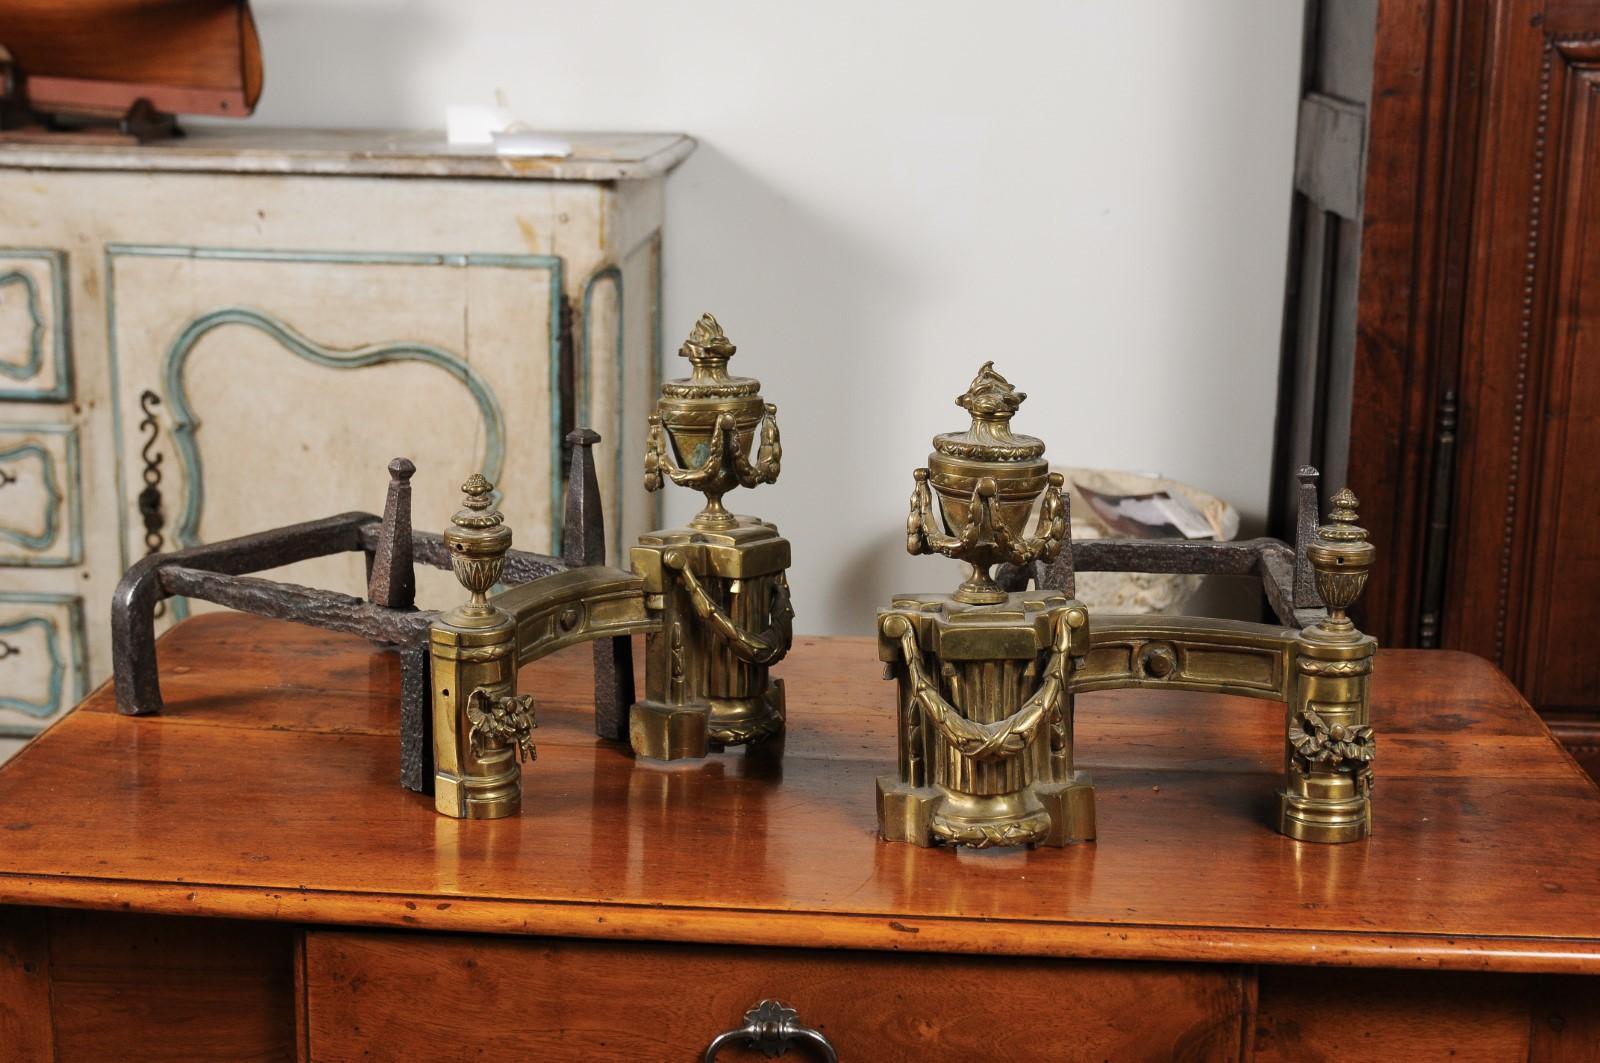 A pair of English neoclassical style brass andirons from the mid-19th century, with fire urns and swag motifs. Born in England during the reign of Queen Victoria, this pair of brass andirons features exquisite fire urns, standing proudly on